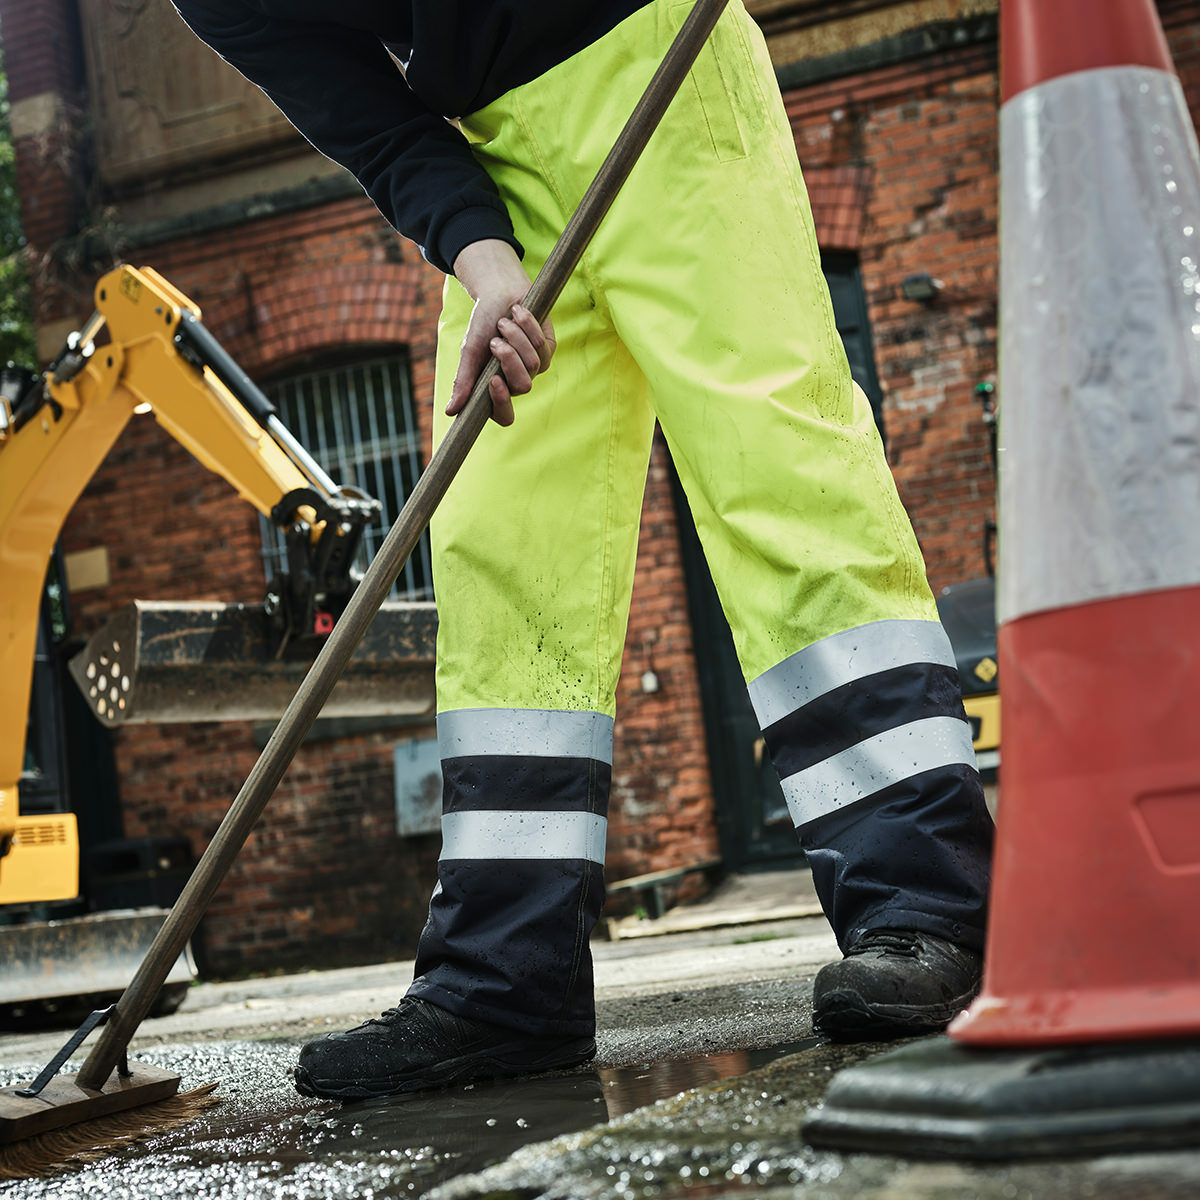 Pro hi-vis insulated overtrousers